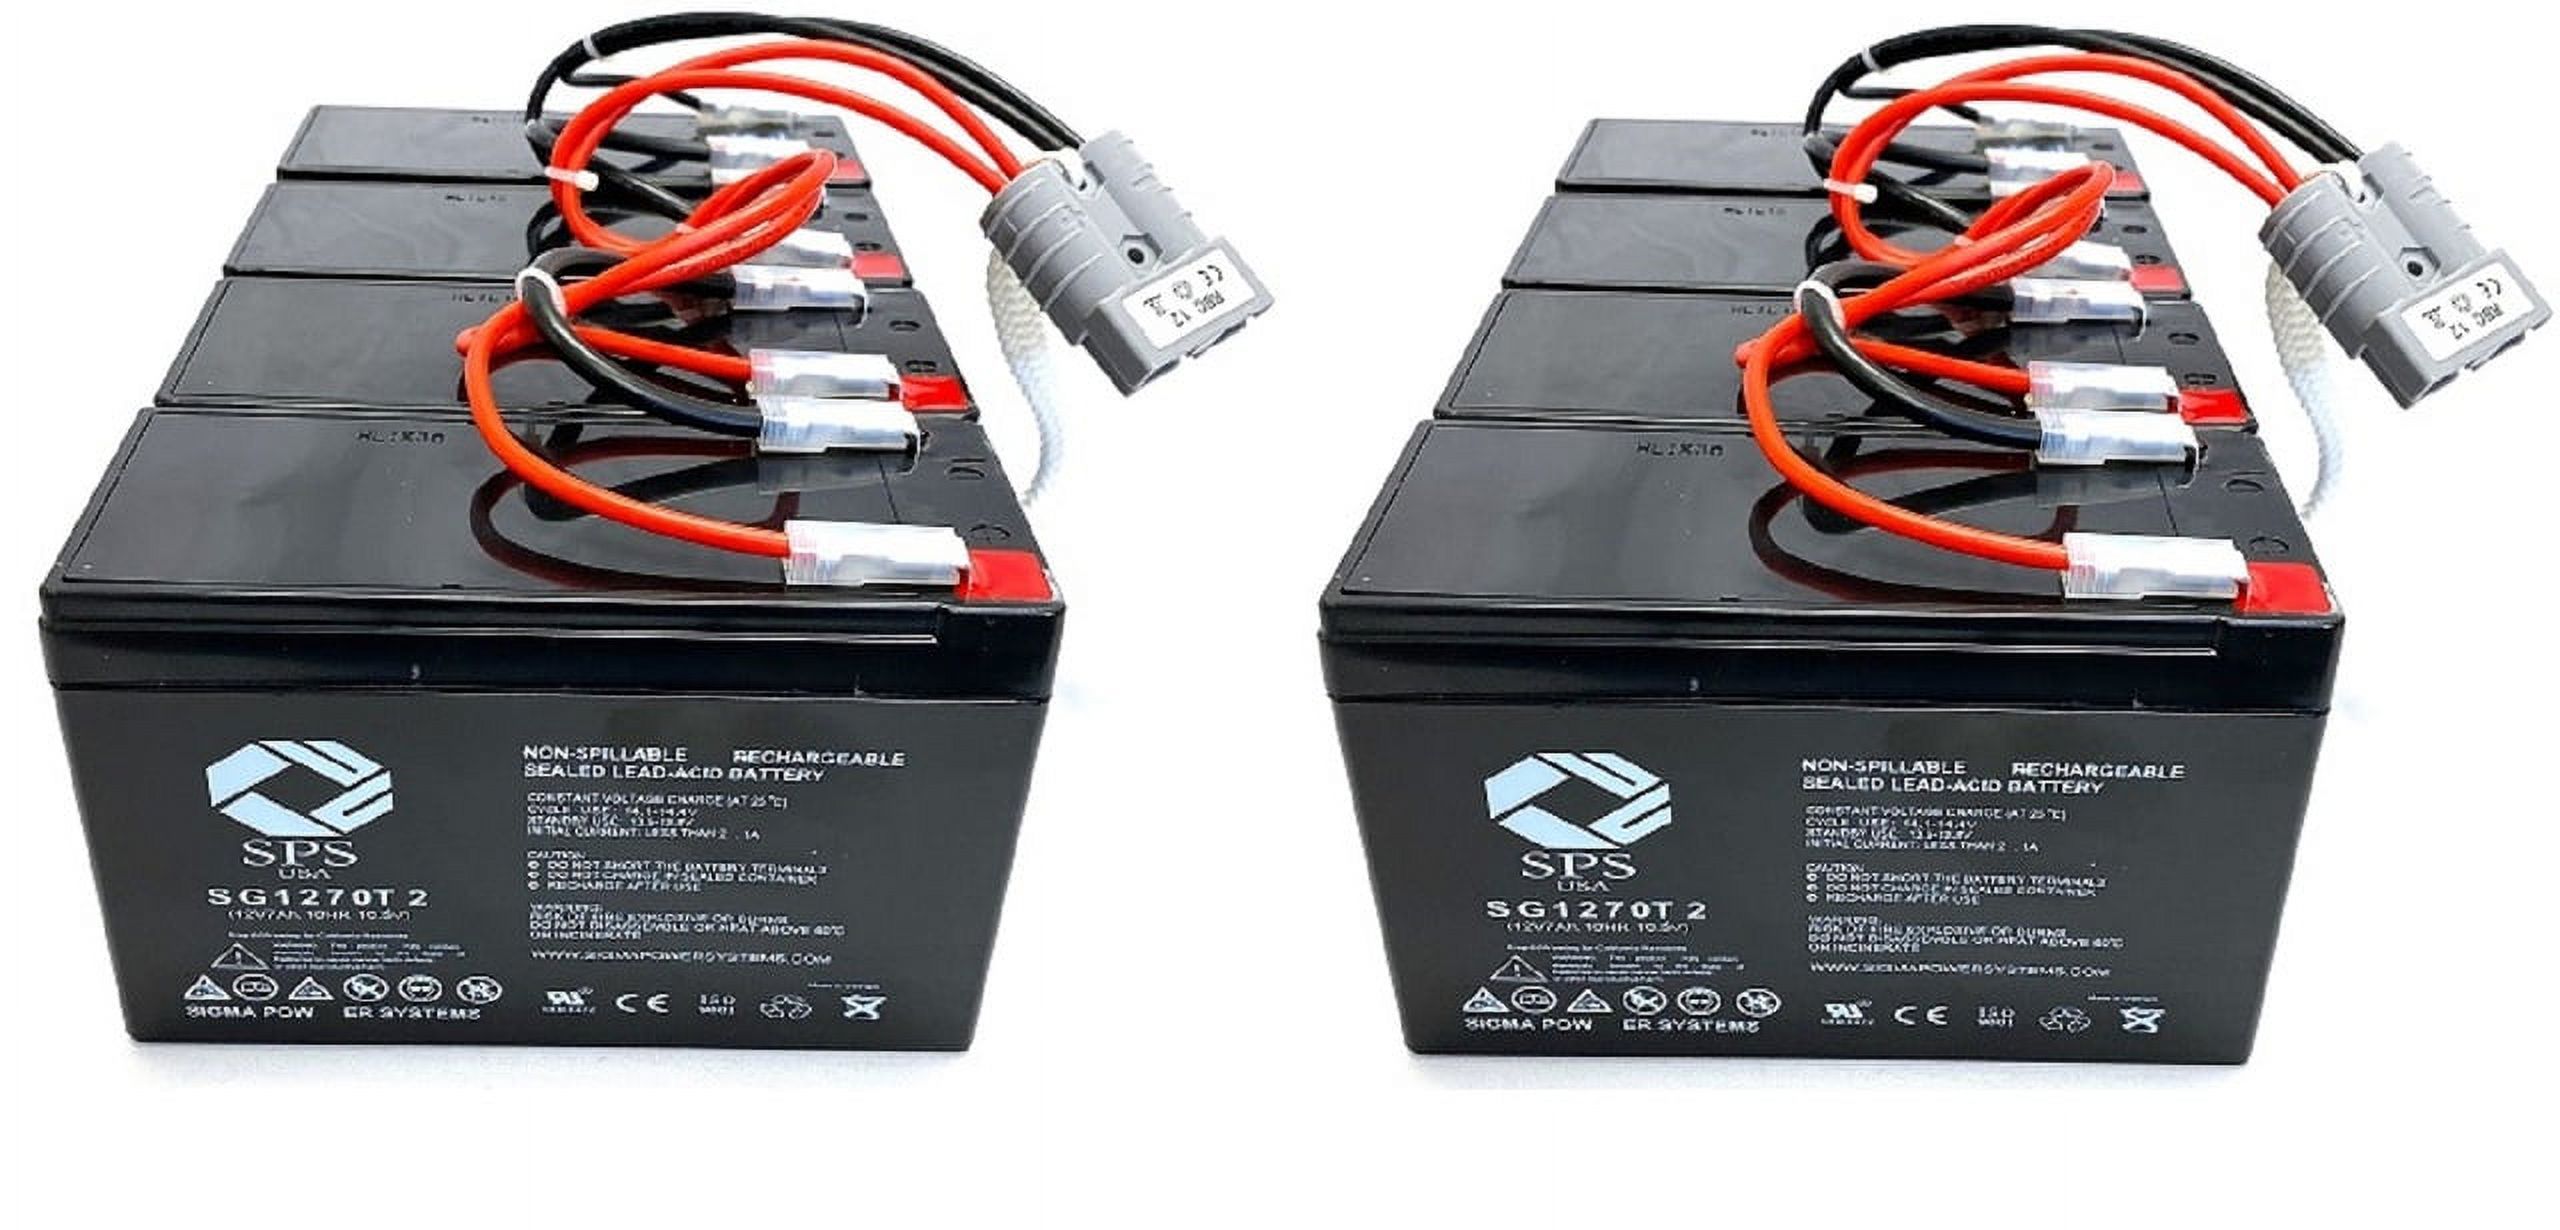 SPS Brand 24V 14Ah Replacement RBC12 Battery Cartridge for APC UPS System - image 2 of 2